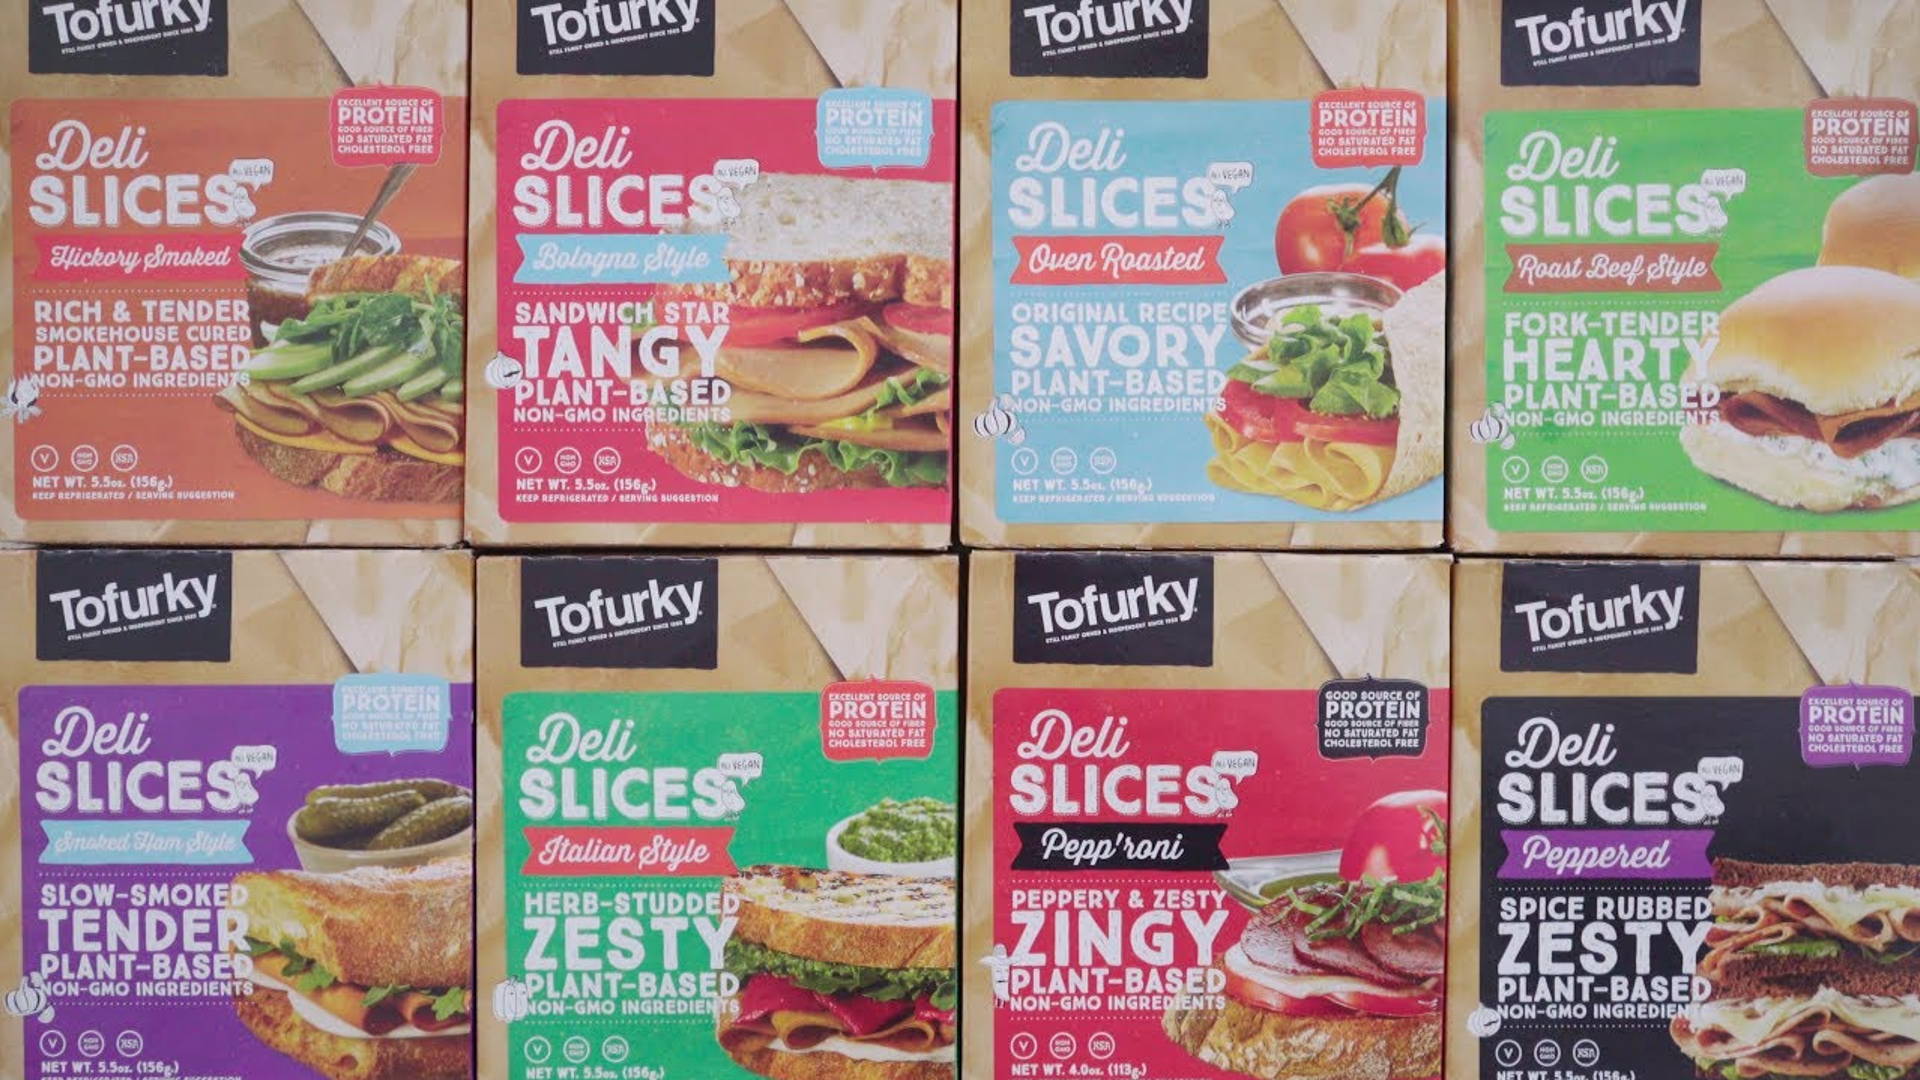 Featured image for Tofurky Says Arkansas Is Censoring Their Packaging With Meat Labeling Laws